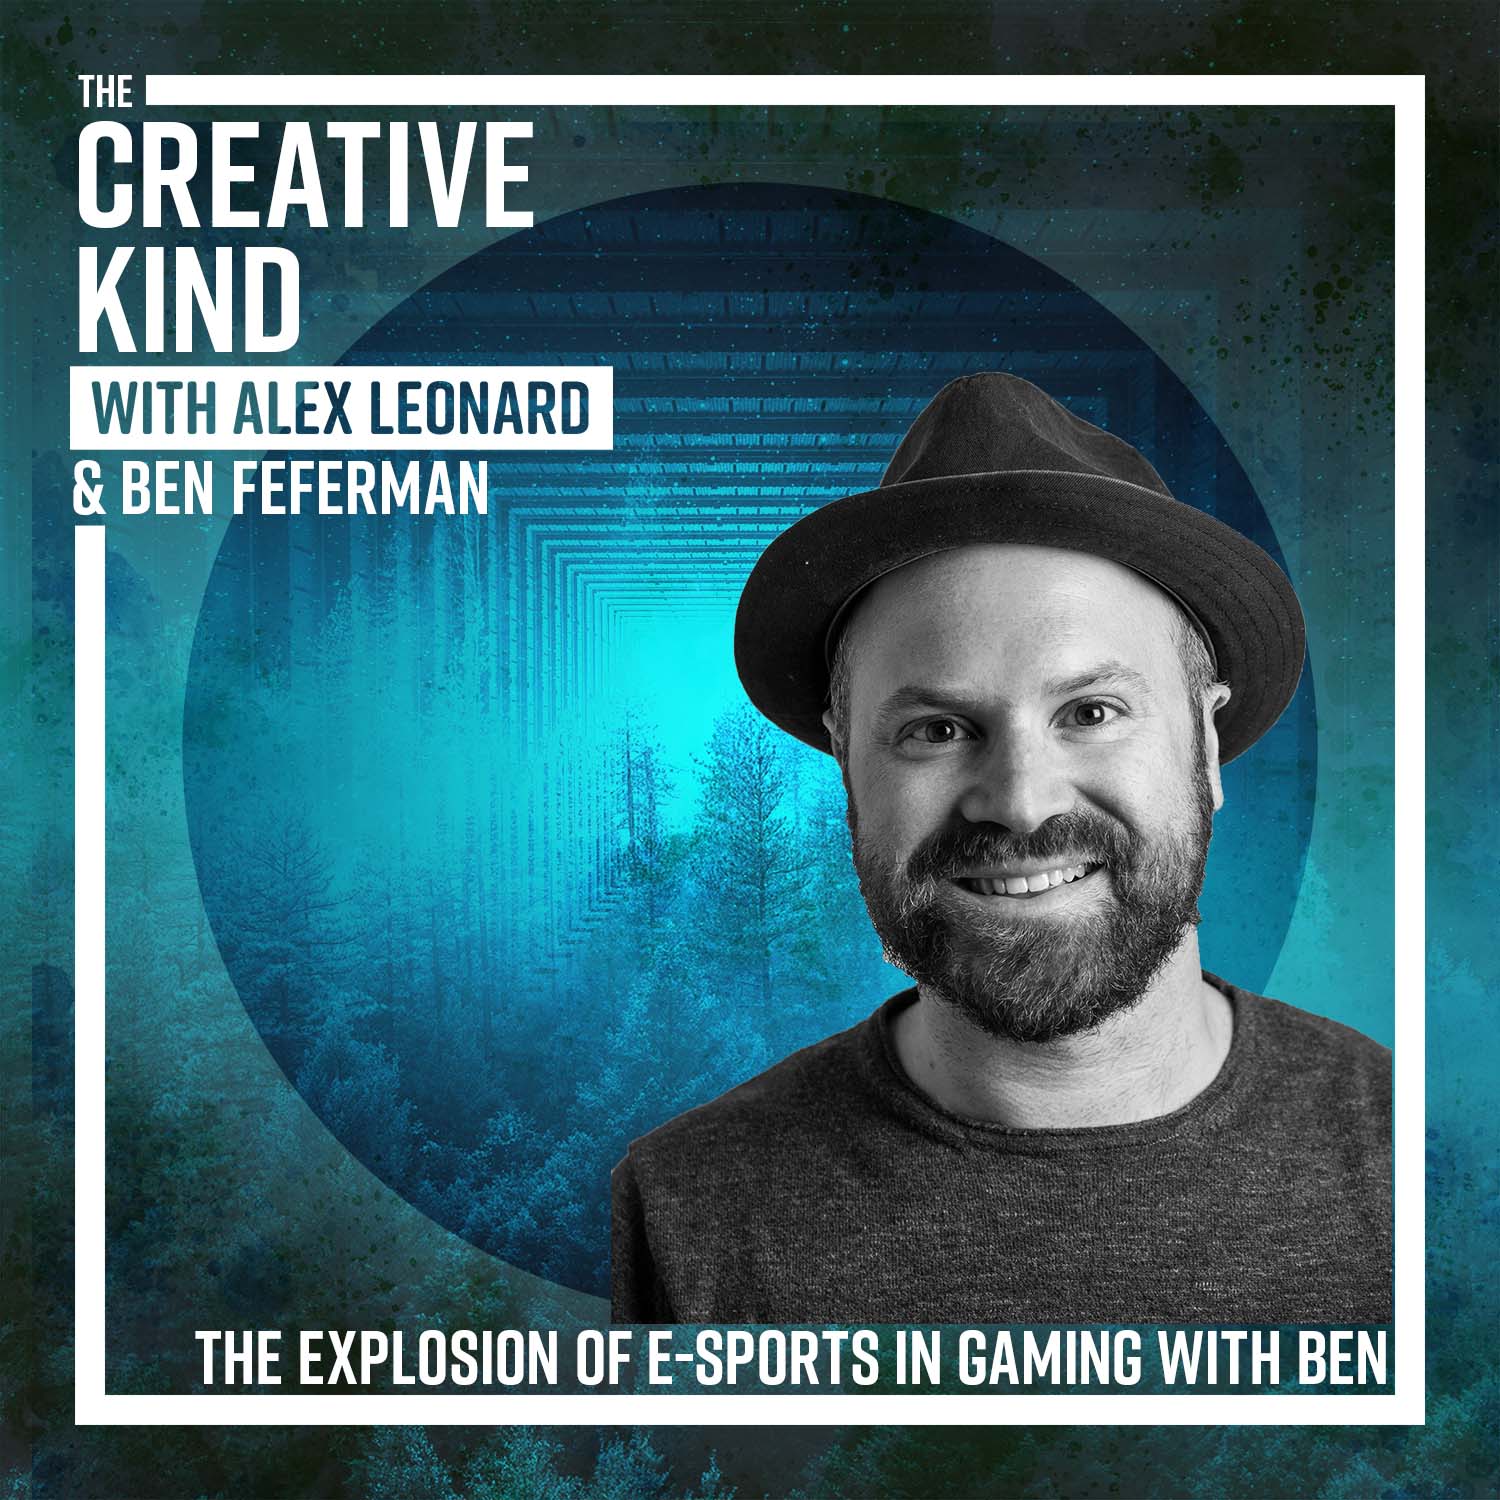 The Explosion of E-Sports Gaming with Ben Feferman